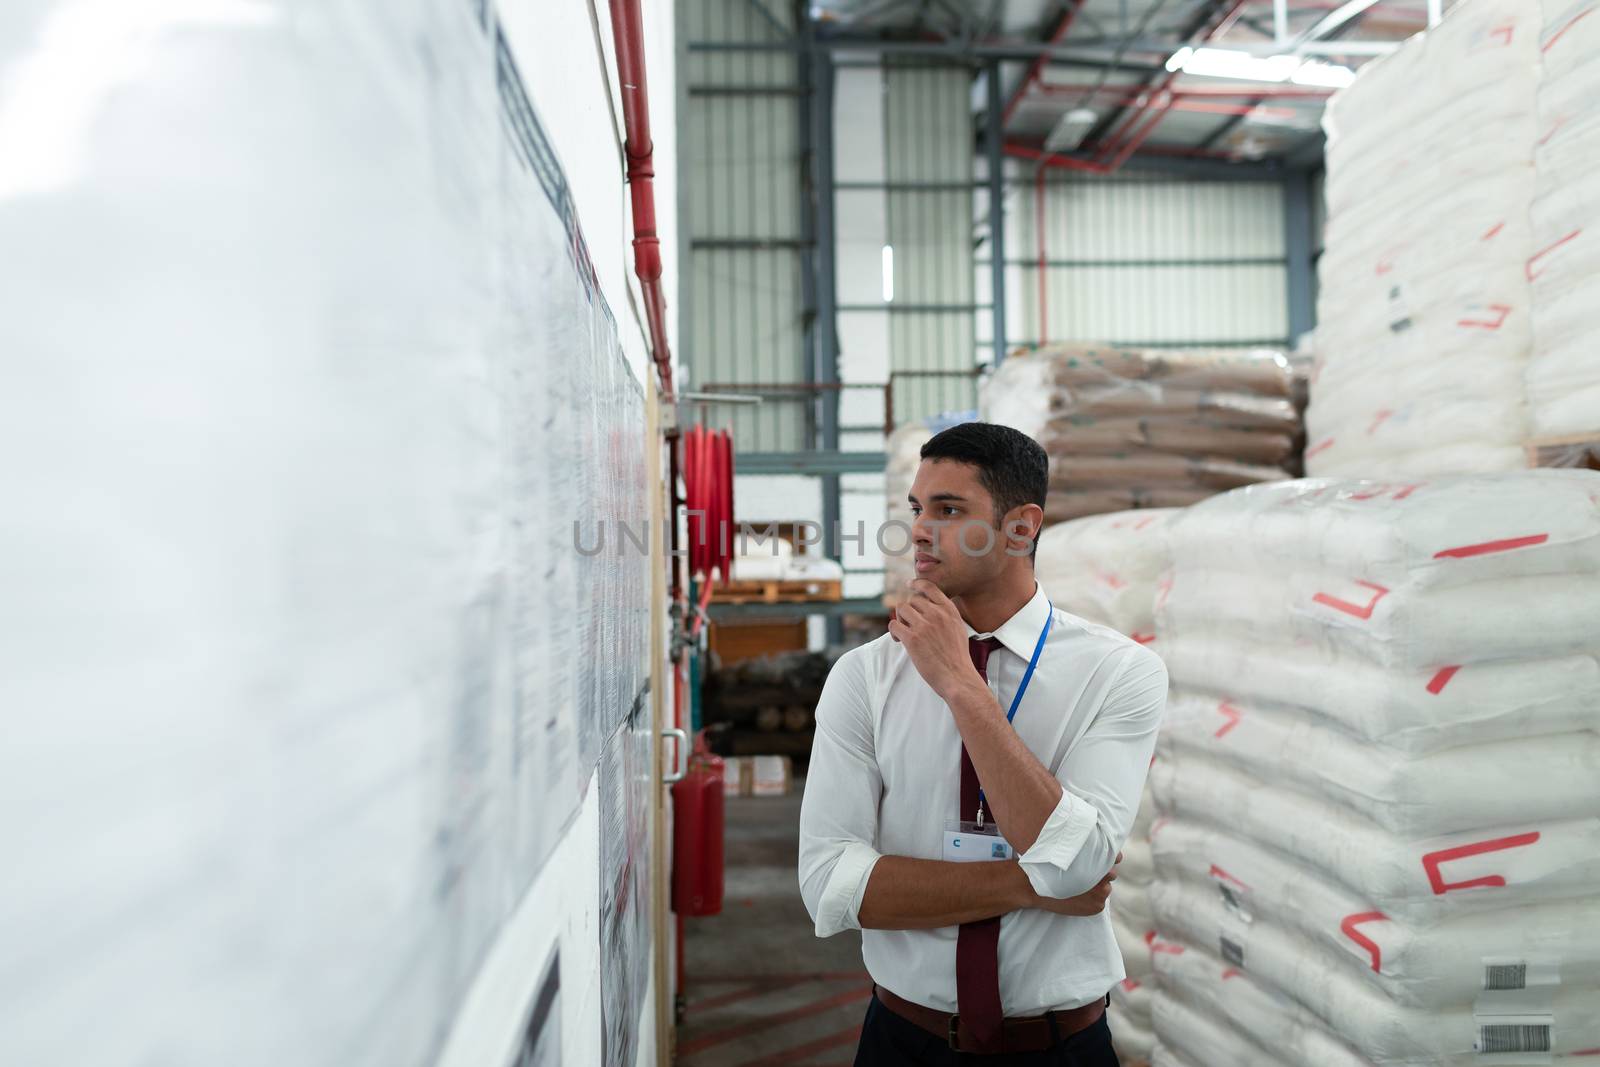 Front view of handsome young mixed-race male supervisor looking at inventory records on wall. This is a freight transportation and distribution warehouse. Industrial and industrial workers concept